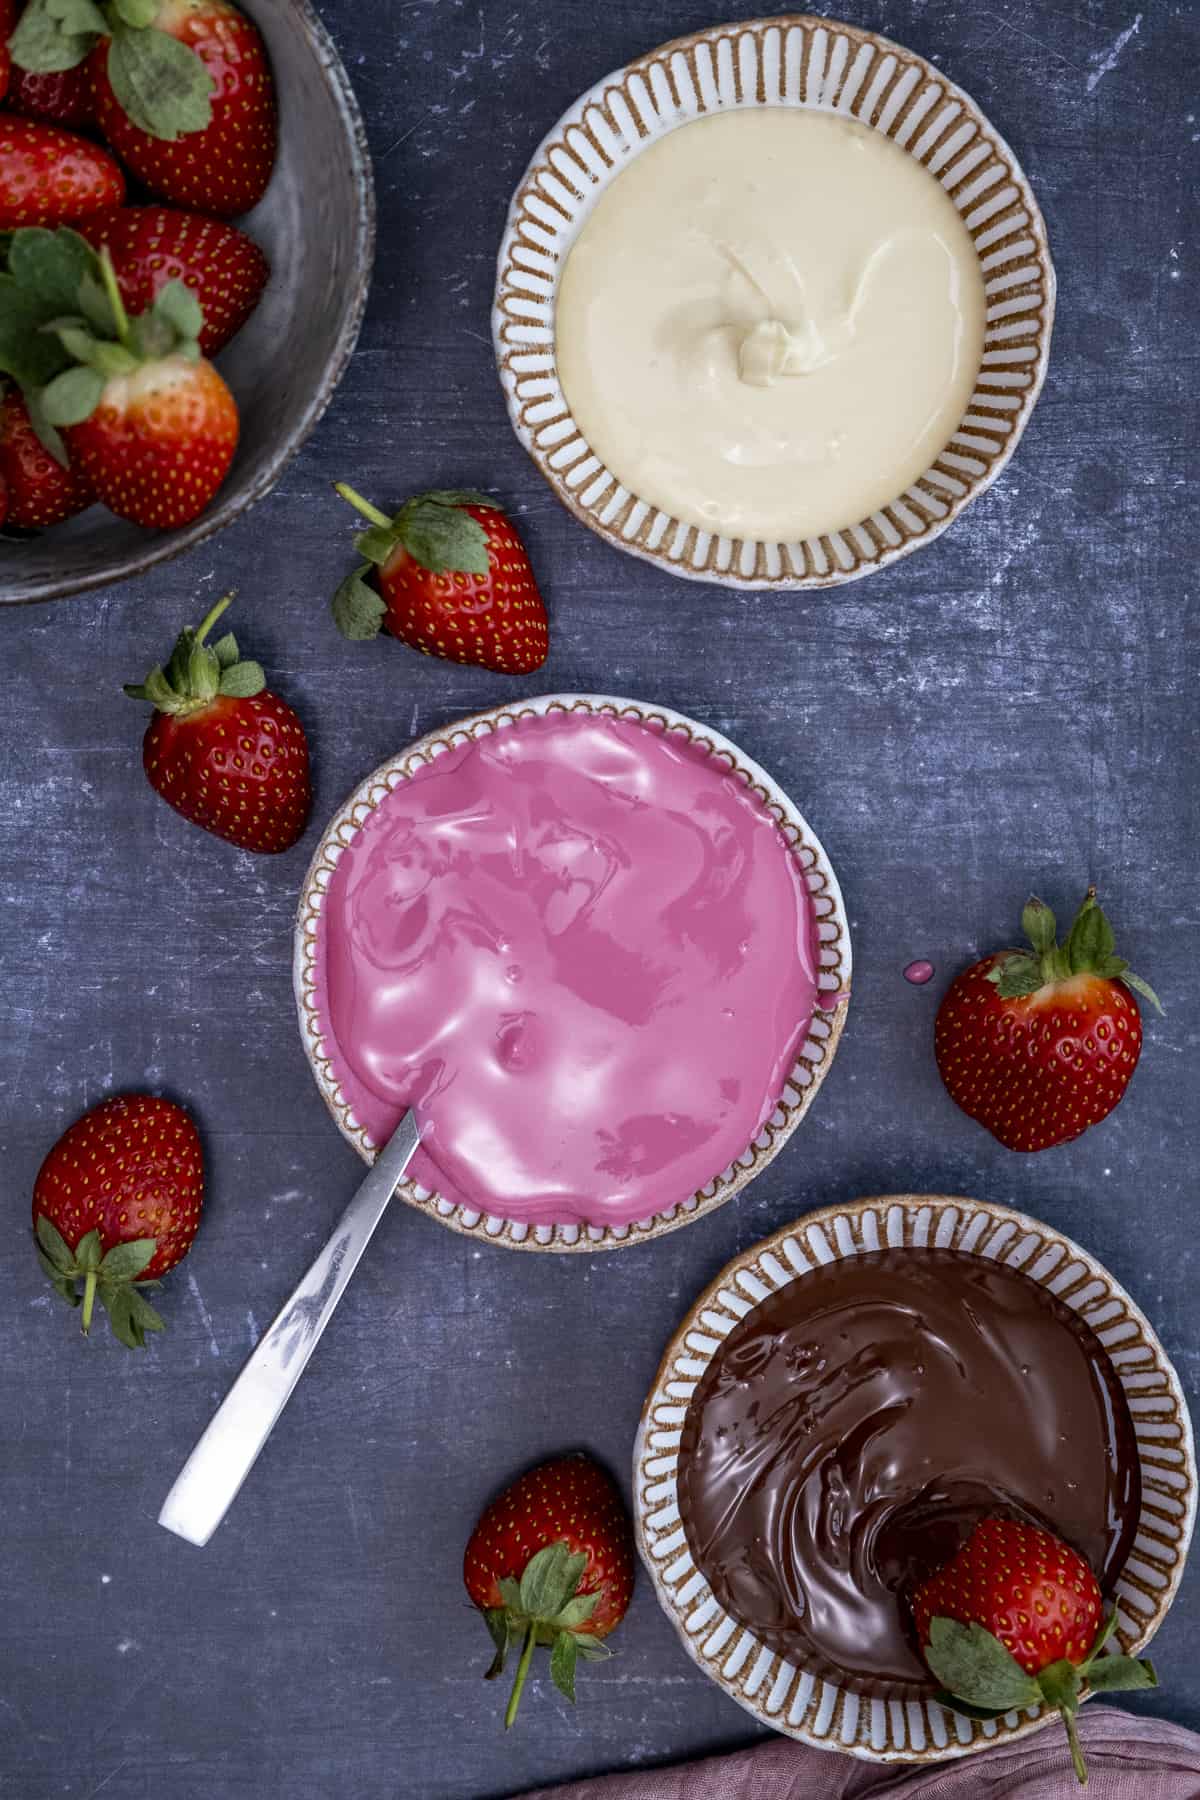 Melted white chocolate, pink candy melts and dark chocolate in separate bowls, strawberries around them on a dark background.